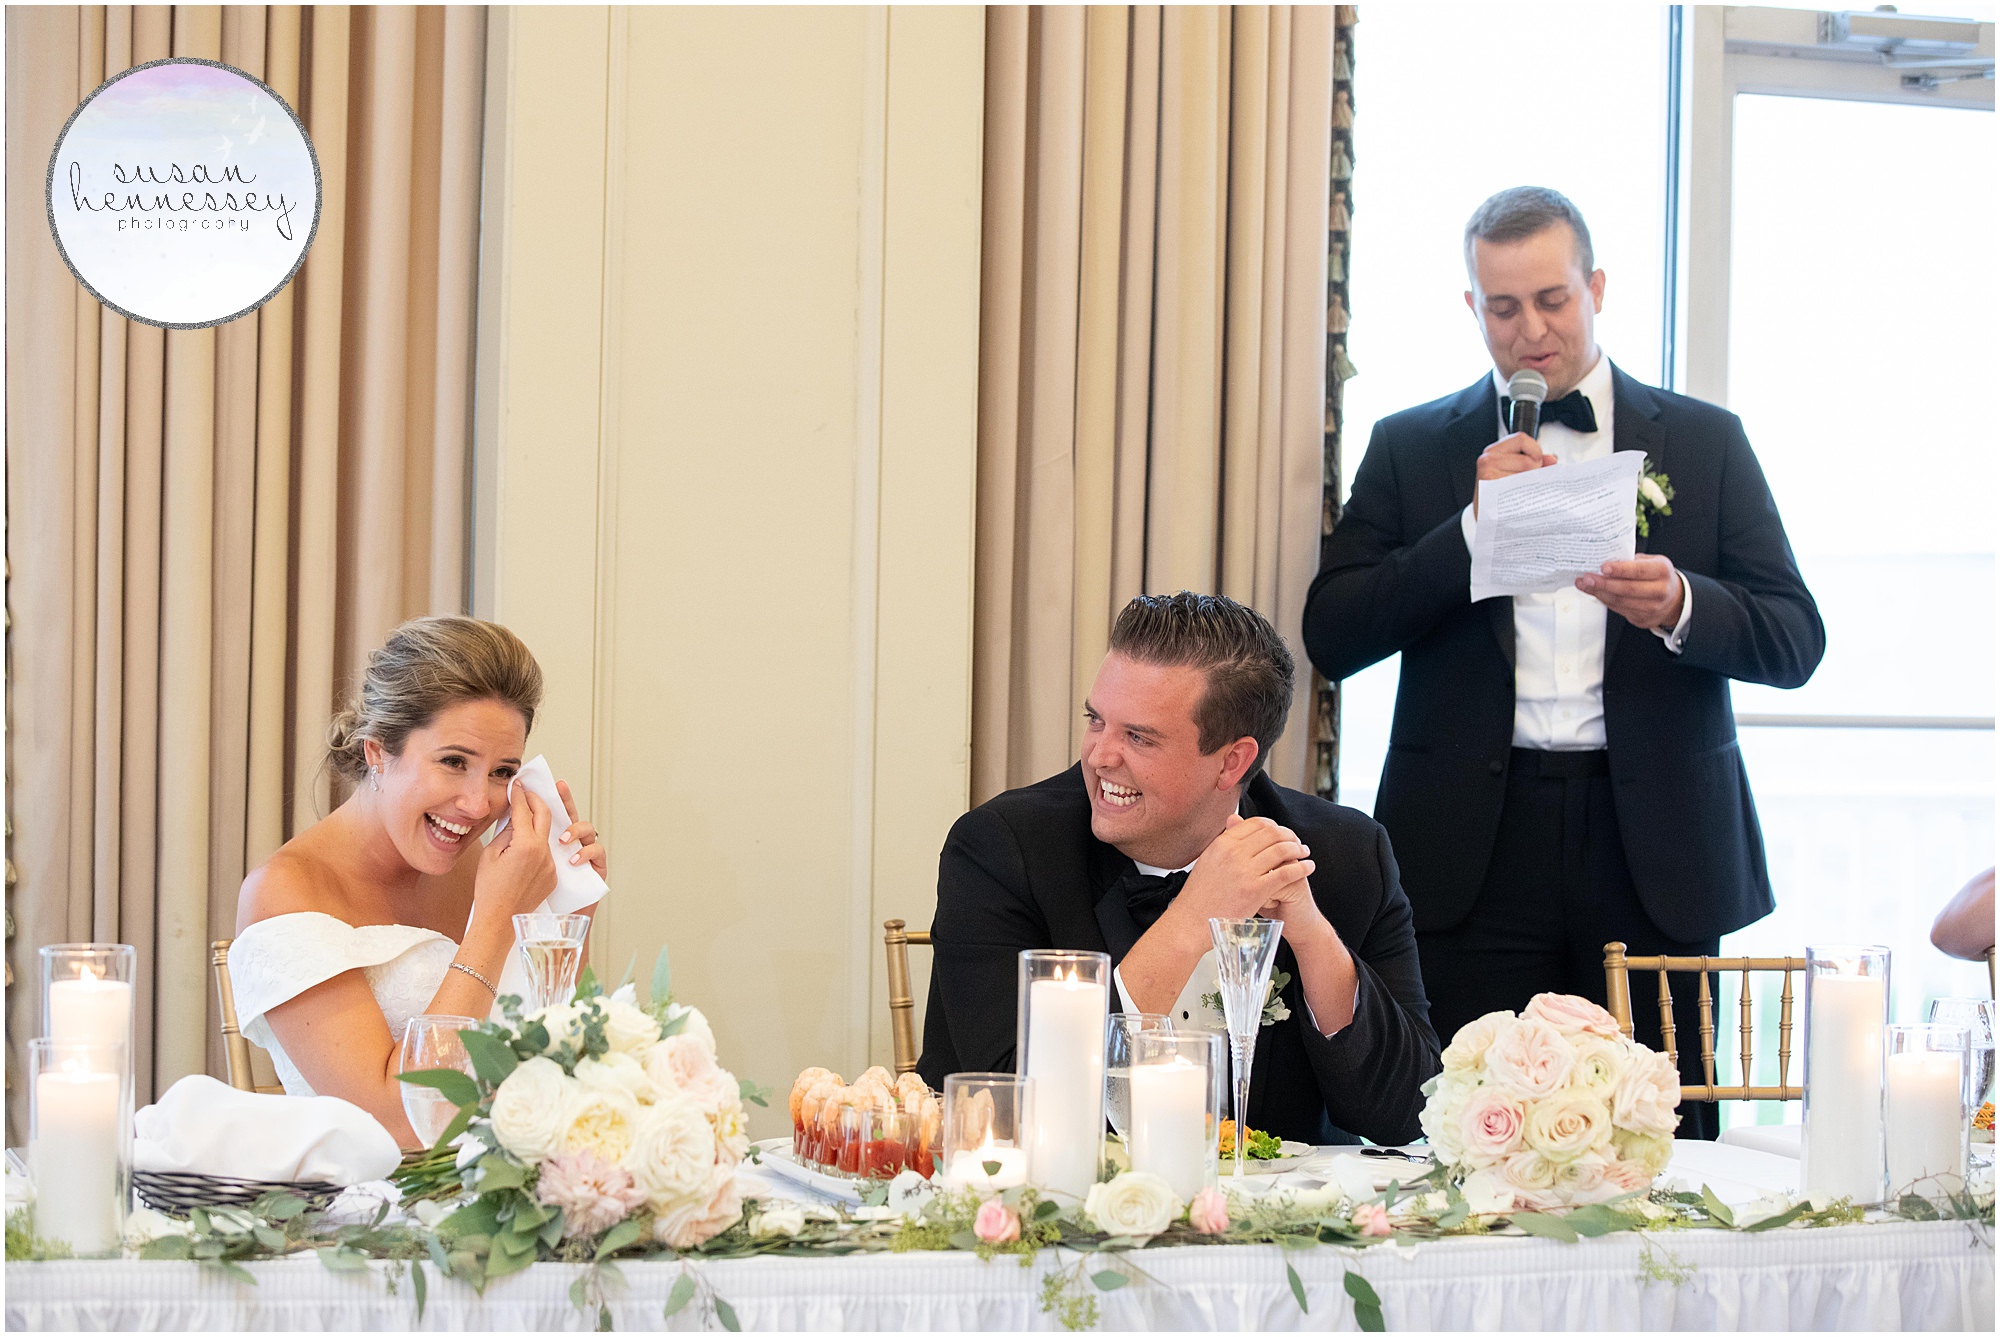 A bride and groom laugh during the best man's speech